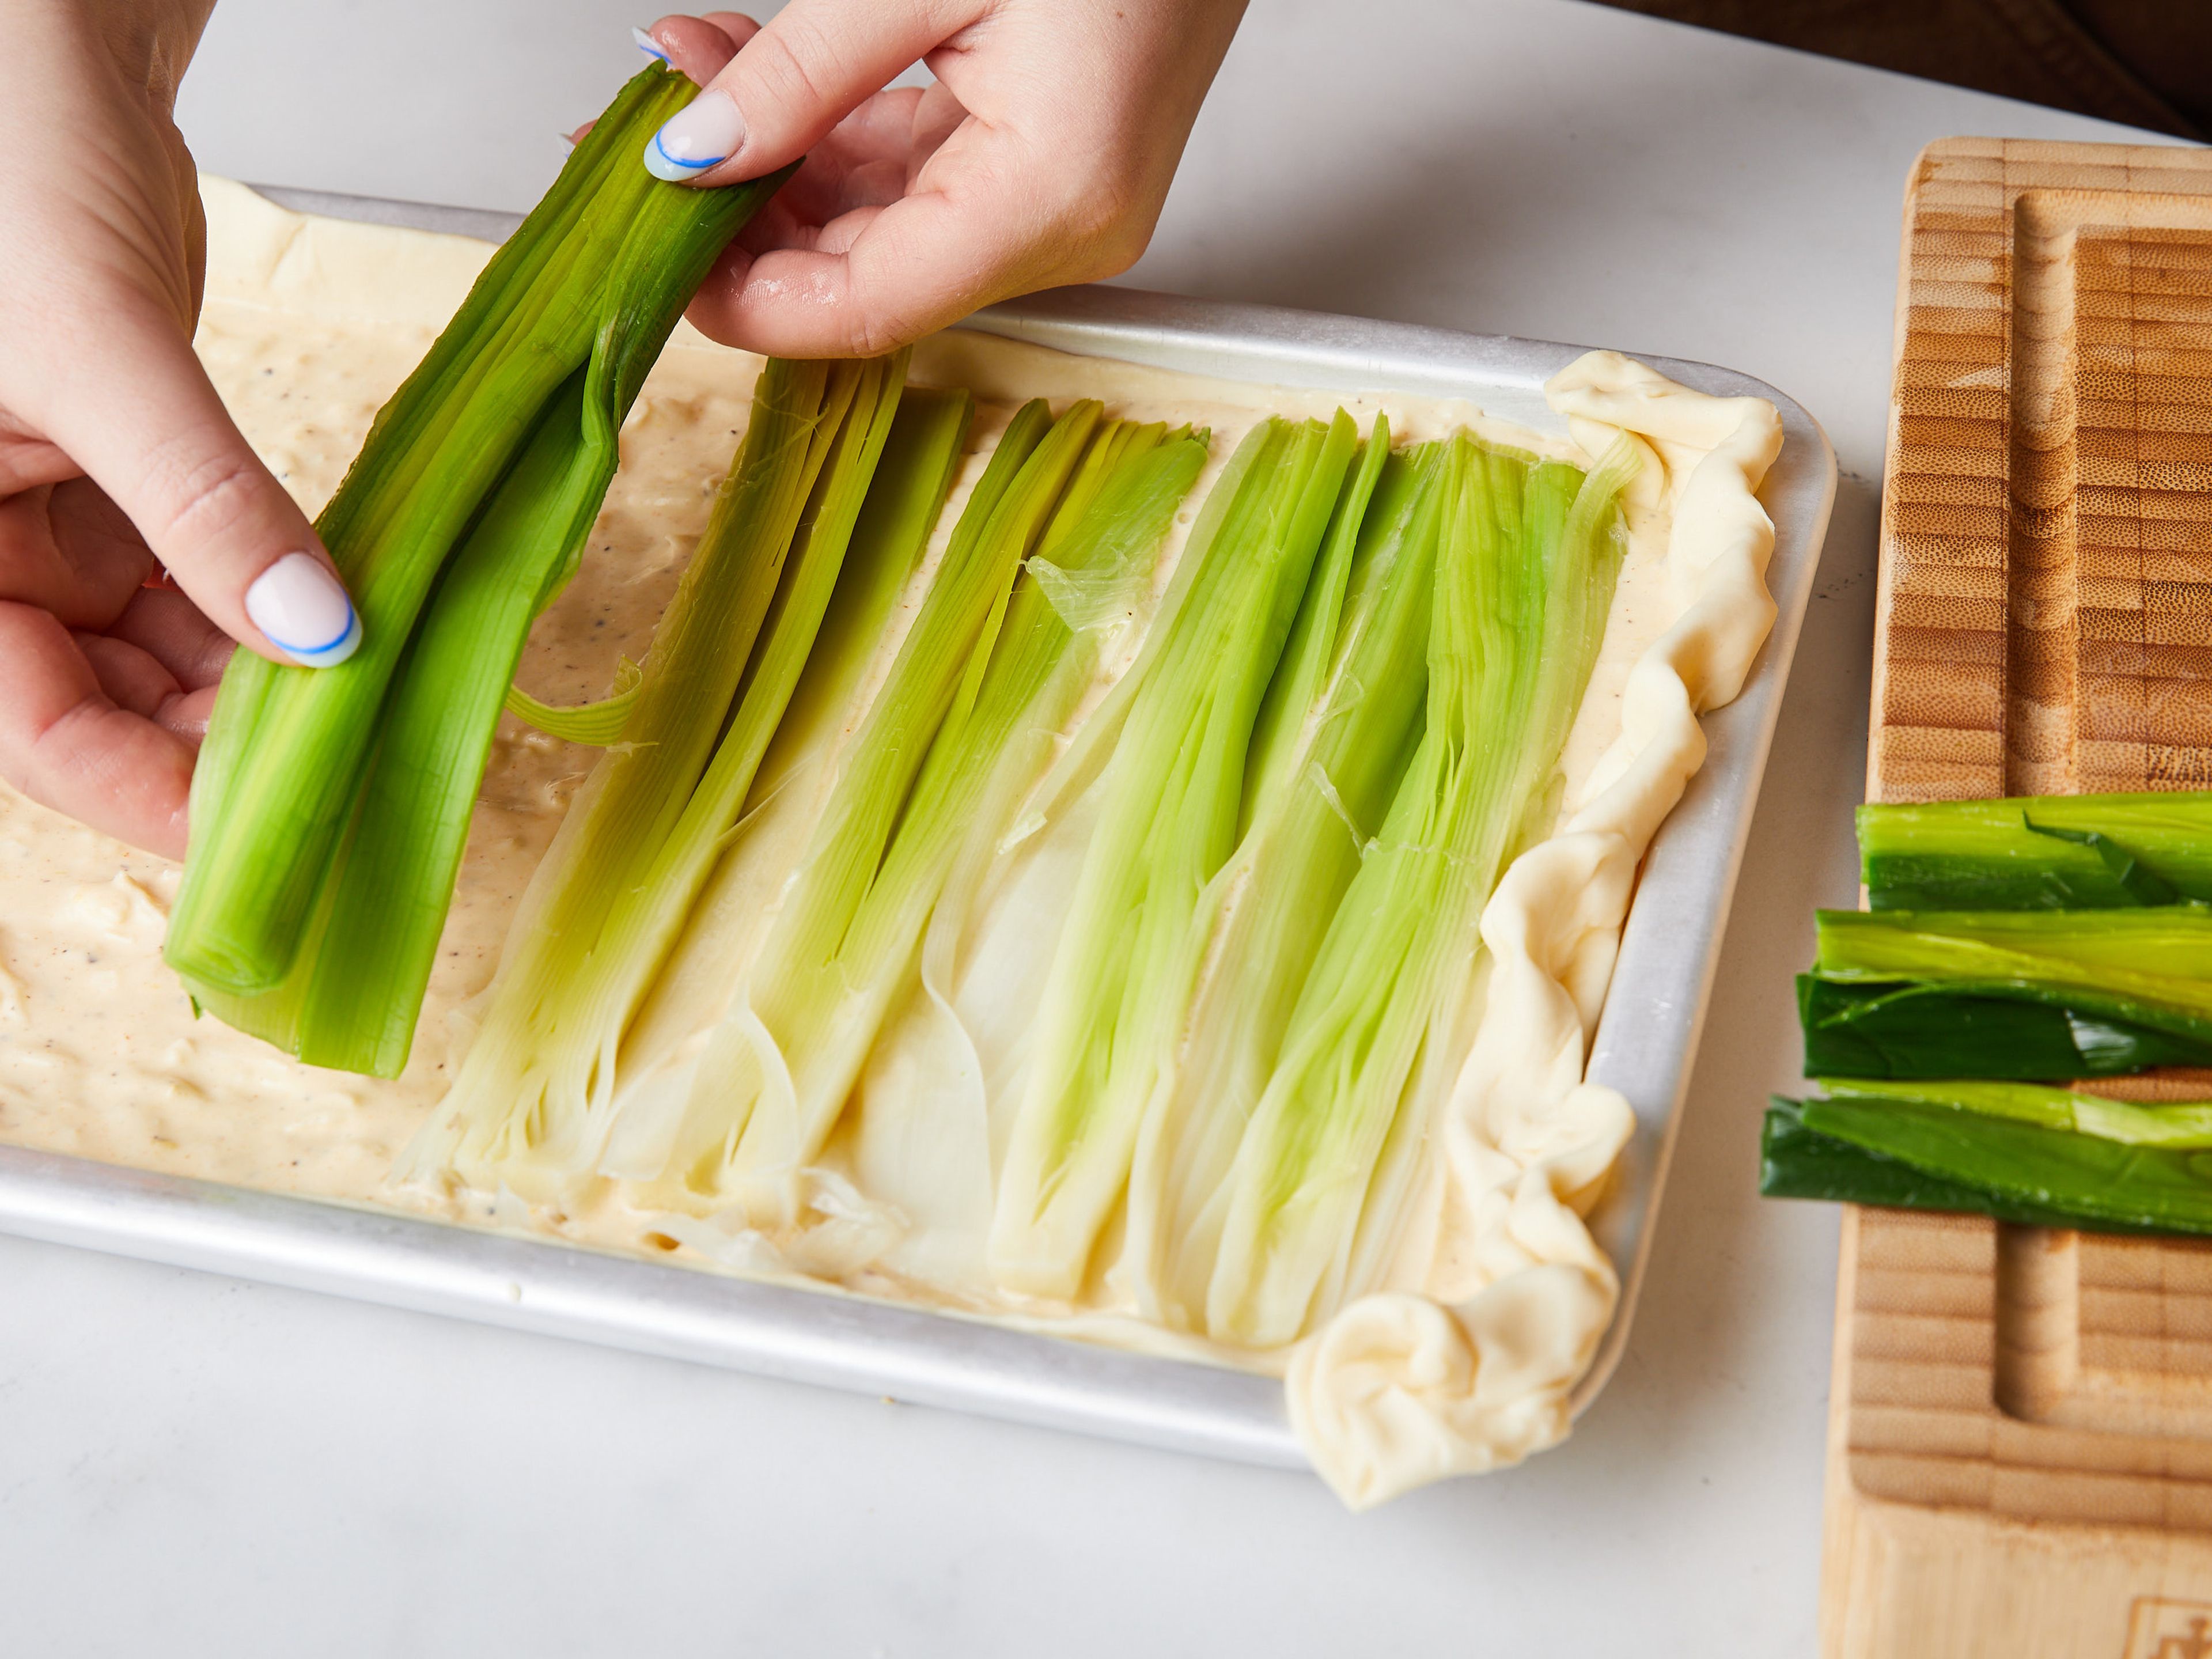 Place the puff pastry into the baking sheet so the entire bottom is covered and you get a small crust around the edges. Pour in the crème fraîche mixture and spread evenly over the base. Then press the halved leeks into the mixture with the cut-side facing up. Bake for approx. 30 min. at 200°C/400°F until golden-brown. Slice and enjoy warm or room temperature!